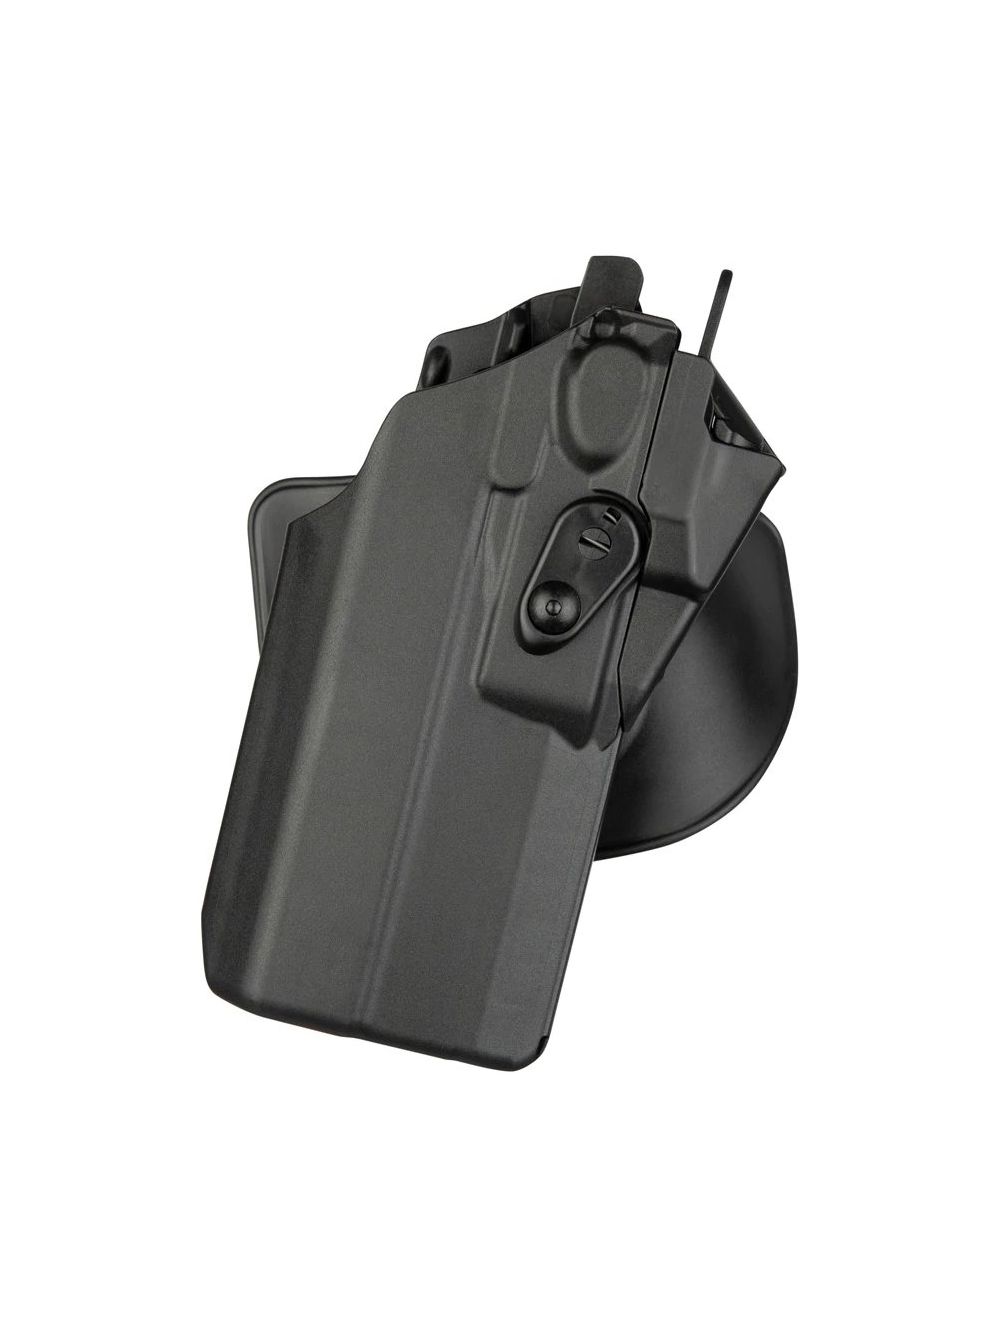 Model 7378RDS 7TS ALS Concealment Paddle & Belt Loop Combo Holster for Glock 19 MOS w/ Light